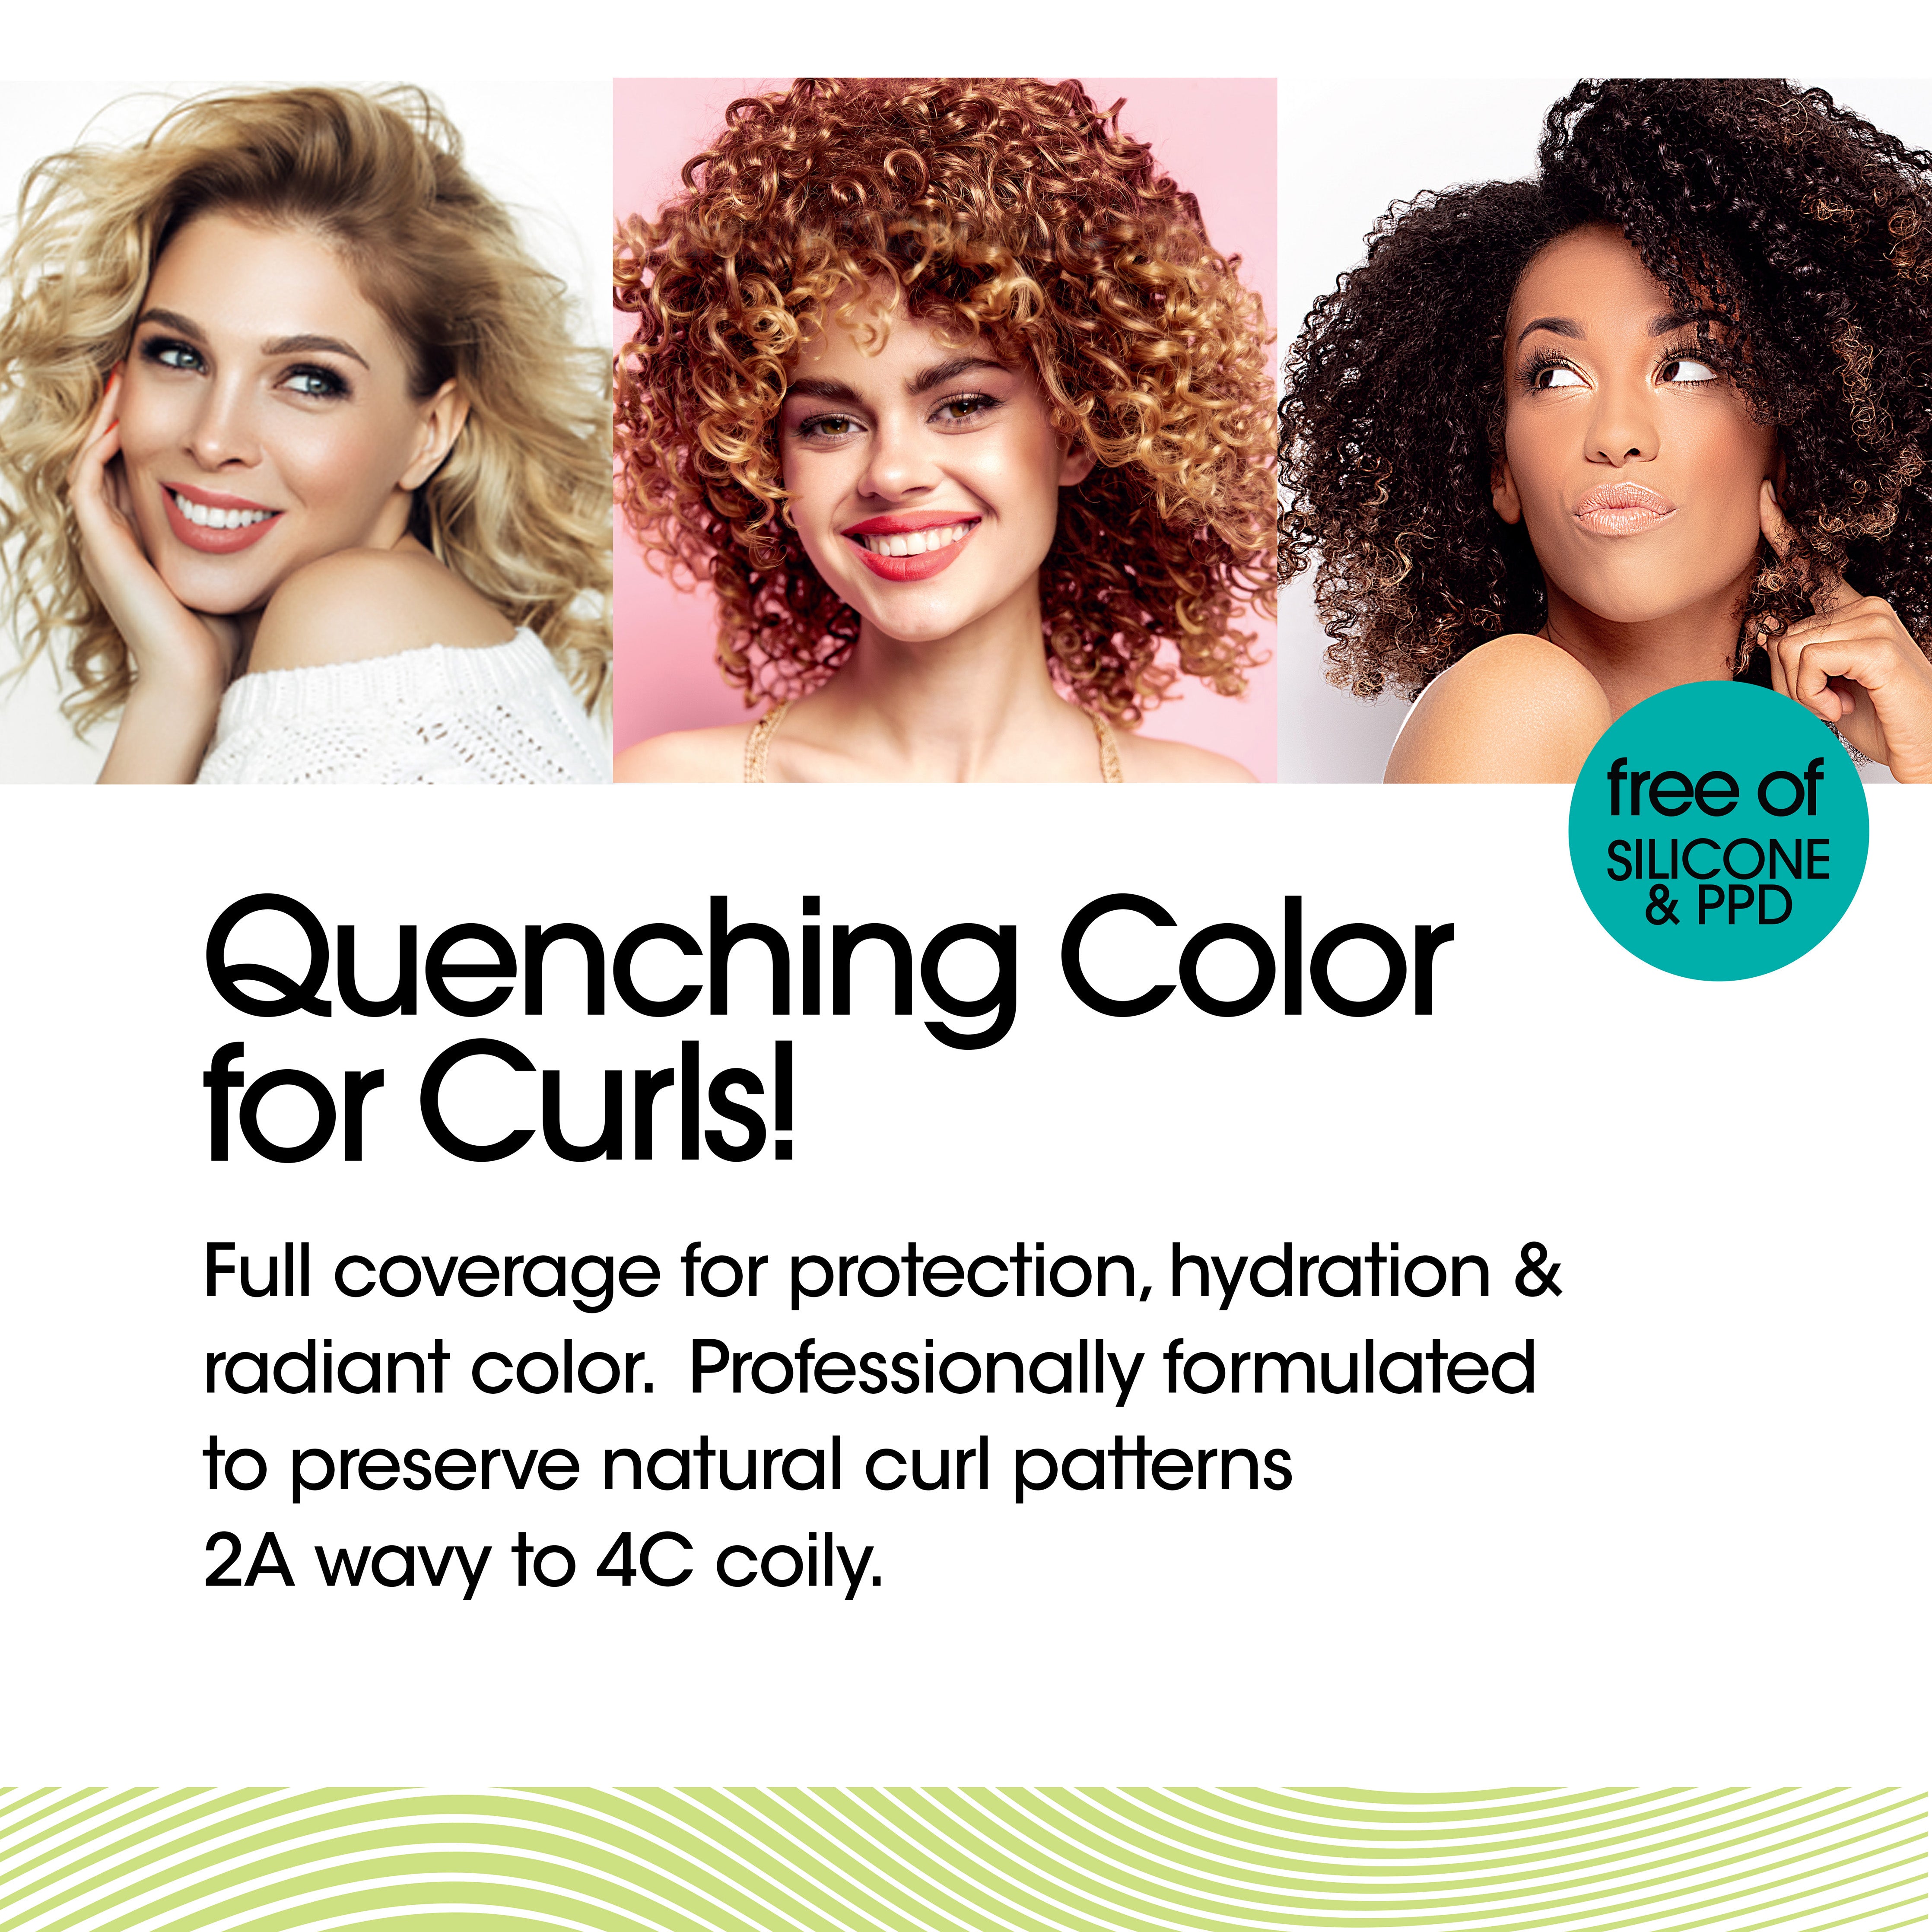 Three models with curly hair posing with the text: Quenching Color for Curls! Full coverage for protection, hydration and radiant color. Professionally formulated to preserve natural curl patterns 2A wavy to 4C coily. Free of silicone and PPD